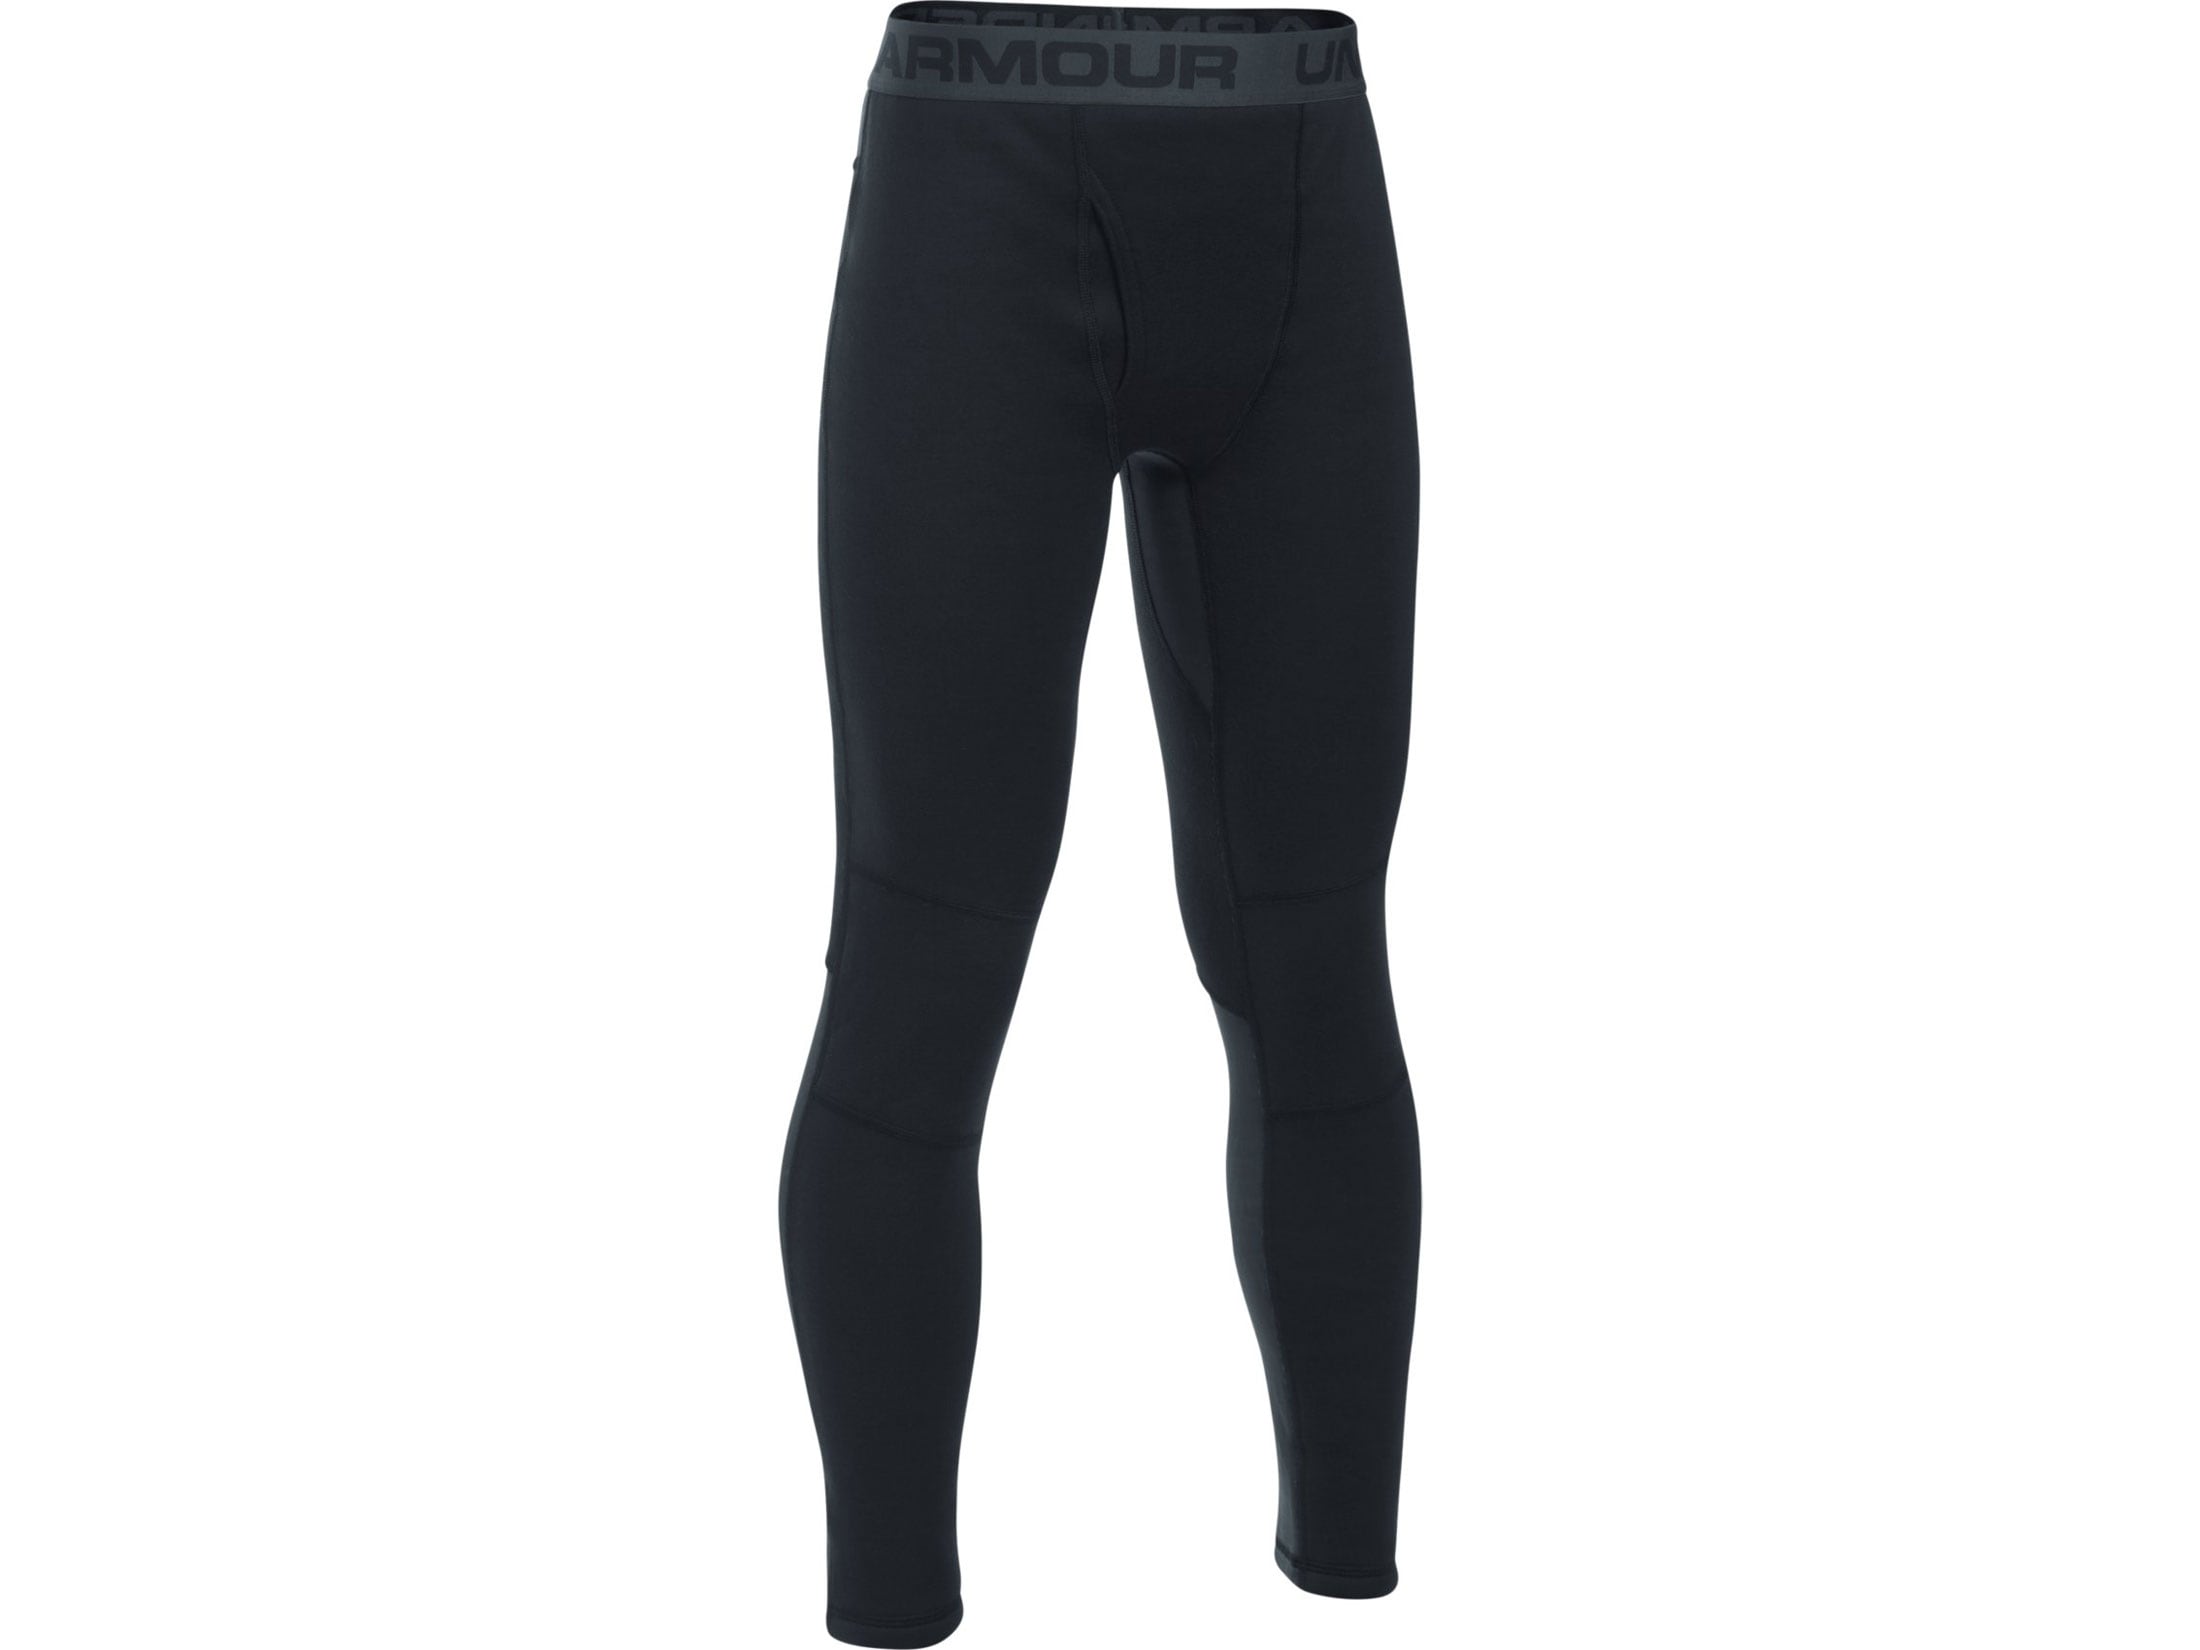 Under Armour Boy's UA Extreme Base Layer Pants Polyester Black Youth